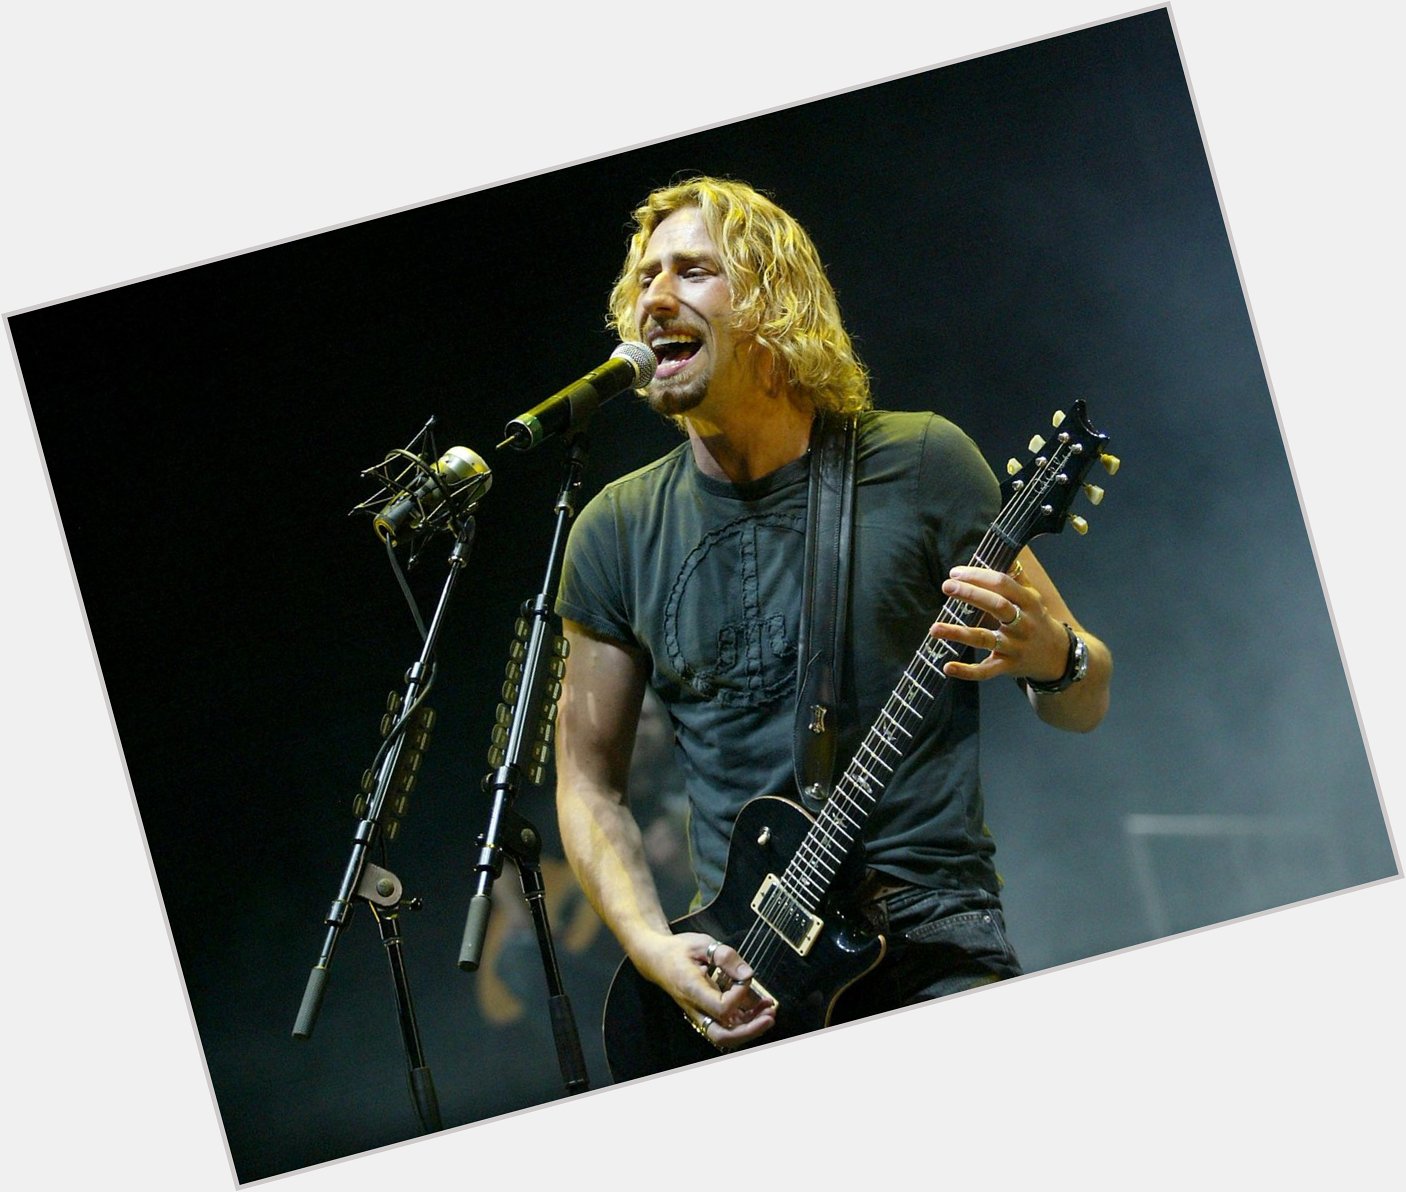 Happy birthday to the musician everyone loves to hate, Chad Kroeger! He celebrates as a Scholar 11 in 